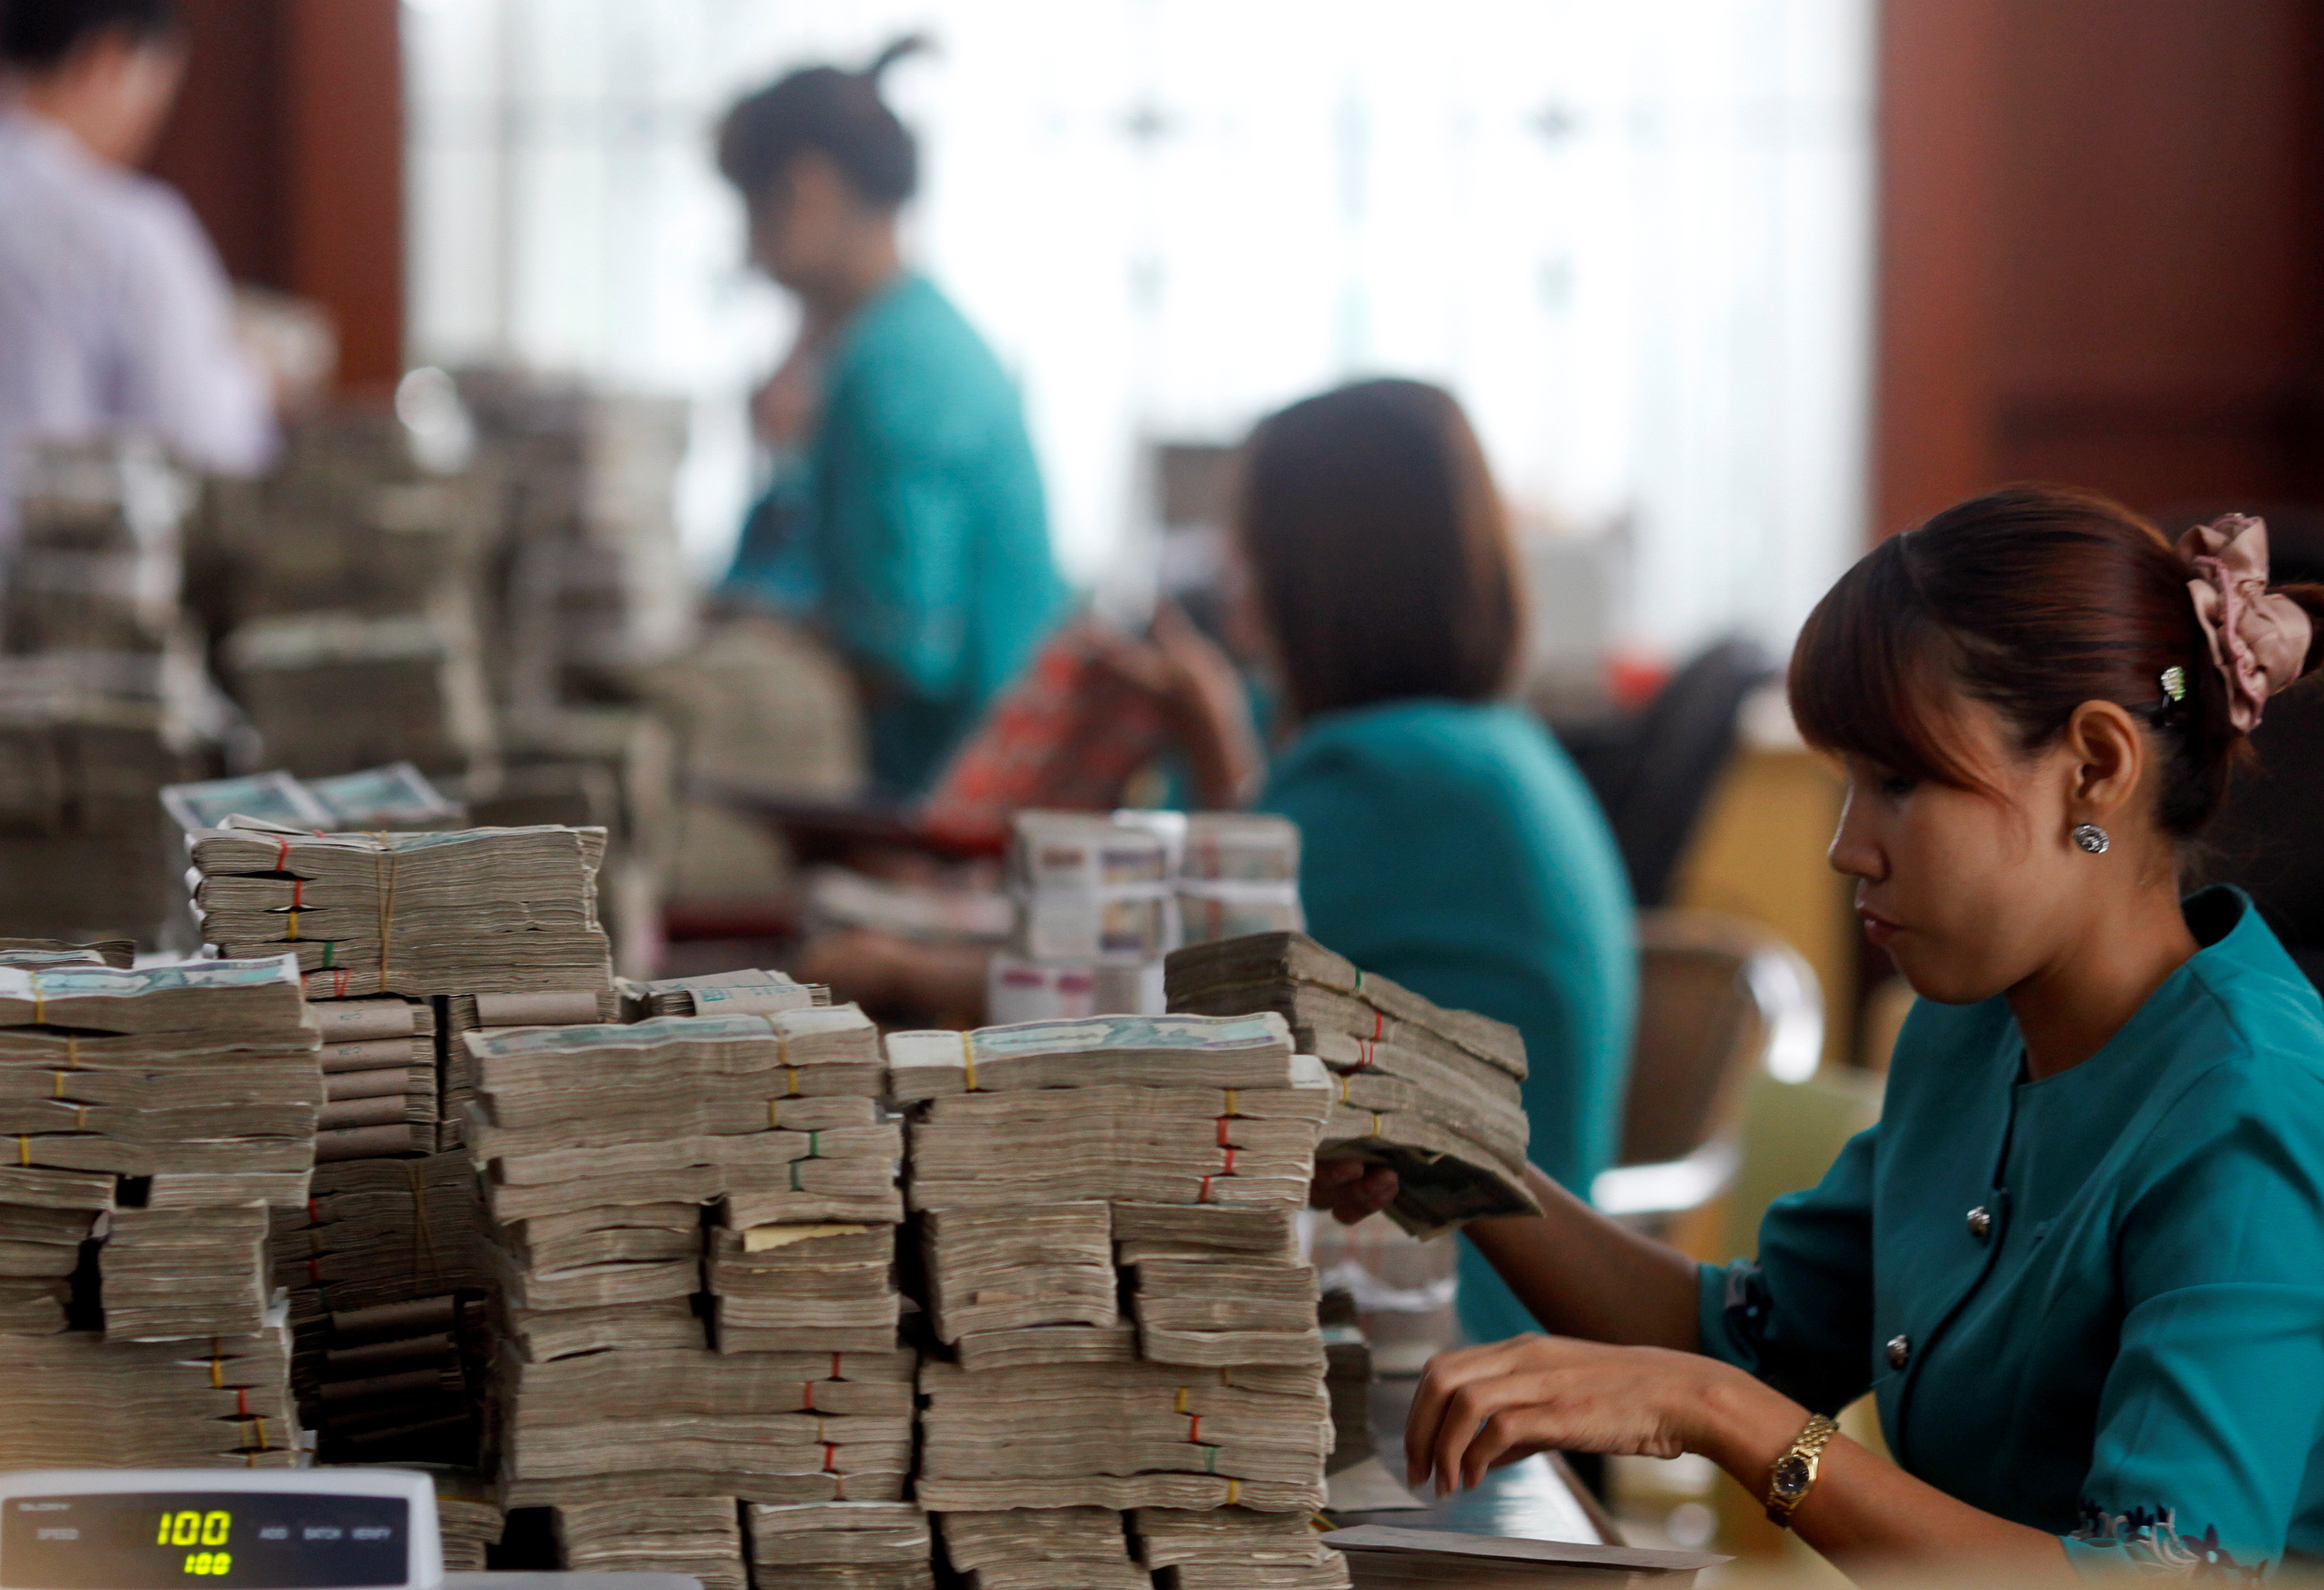 FILE PHOTO: Workers count Myanmar's kyat banknotes at the office of a local bank in Yangon